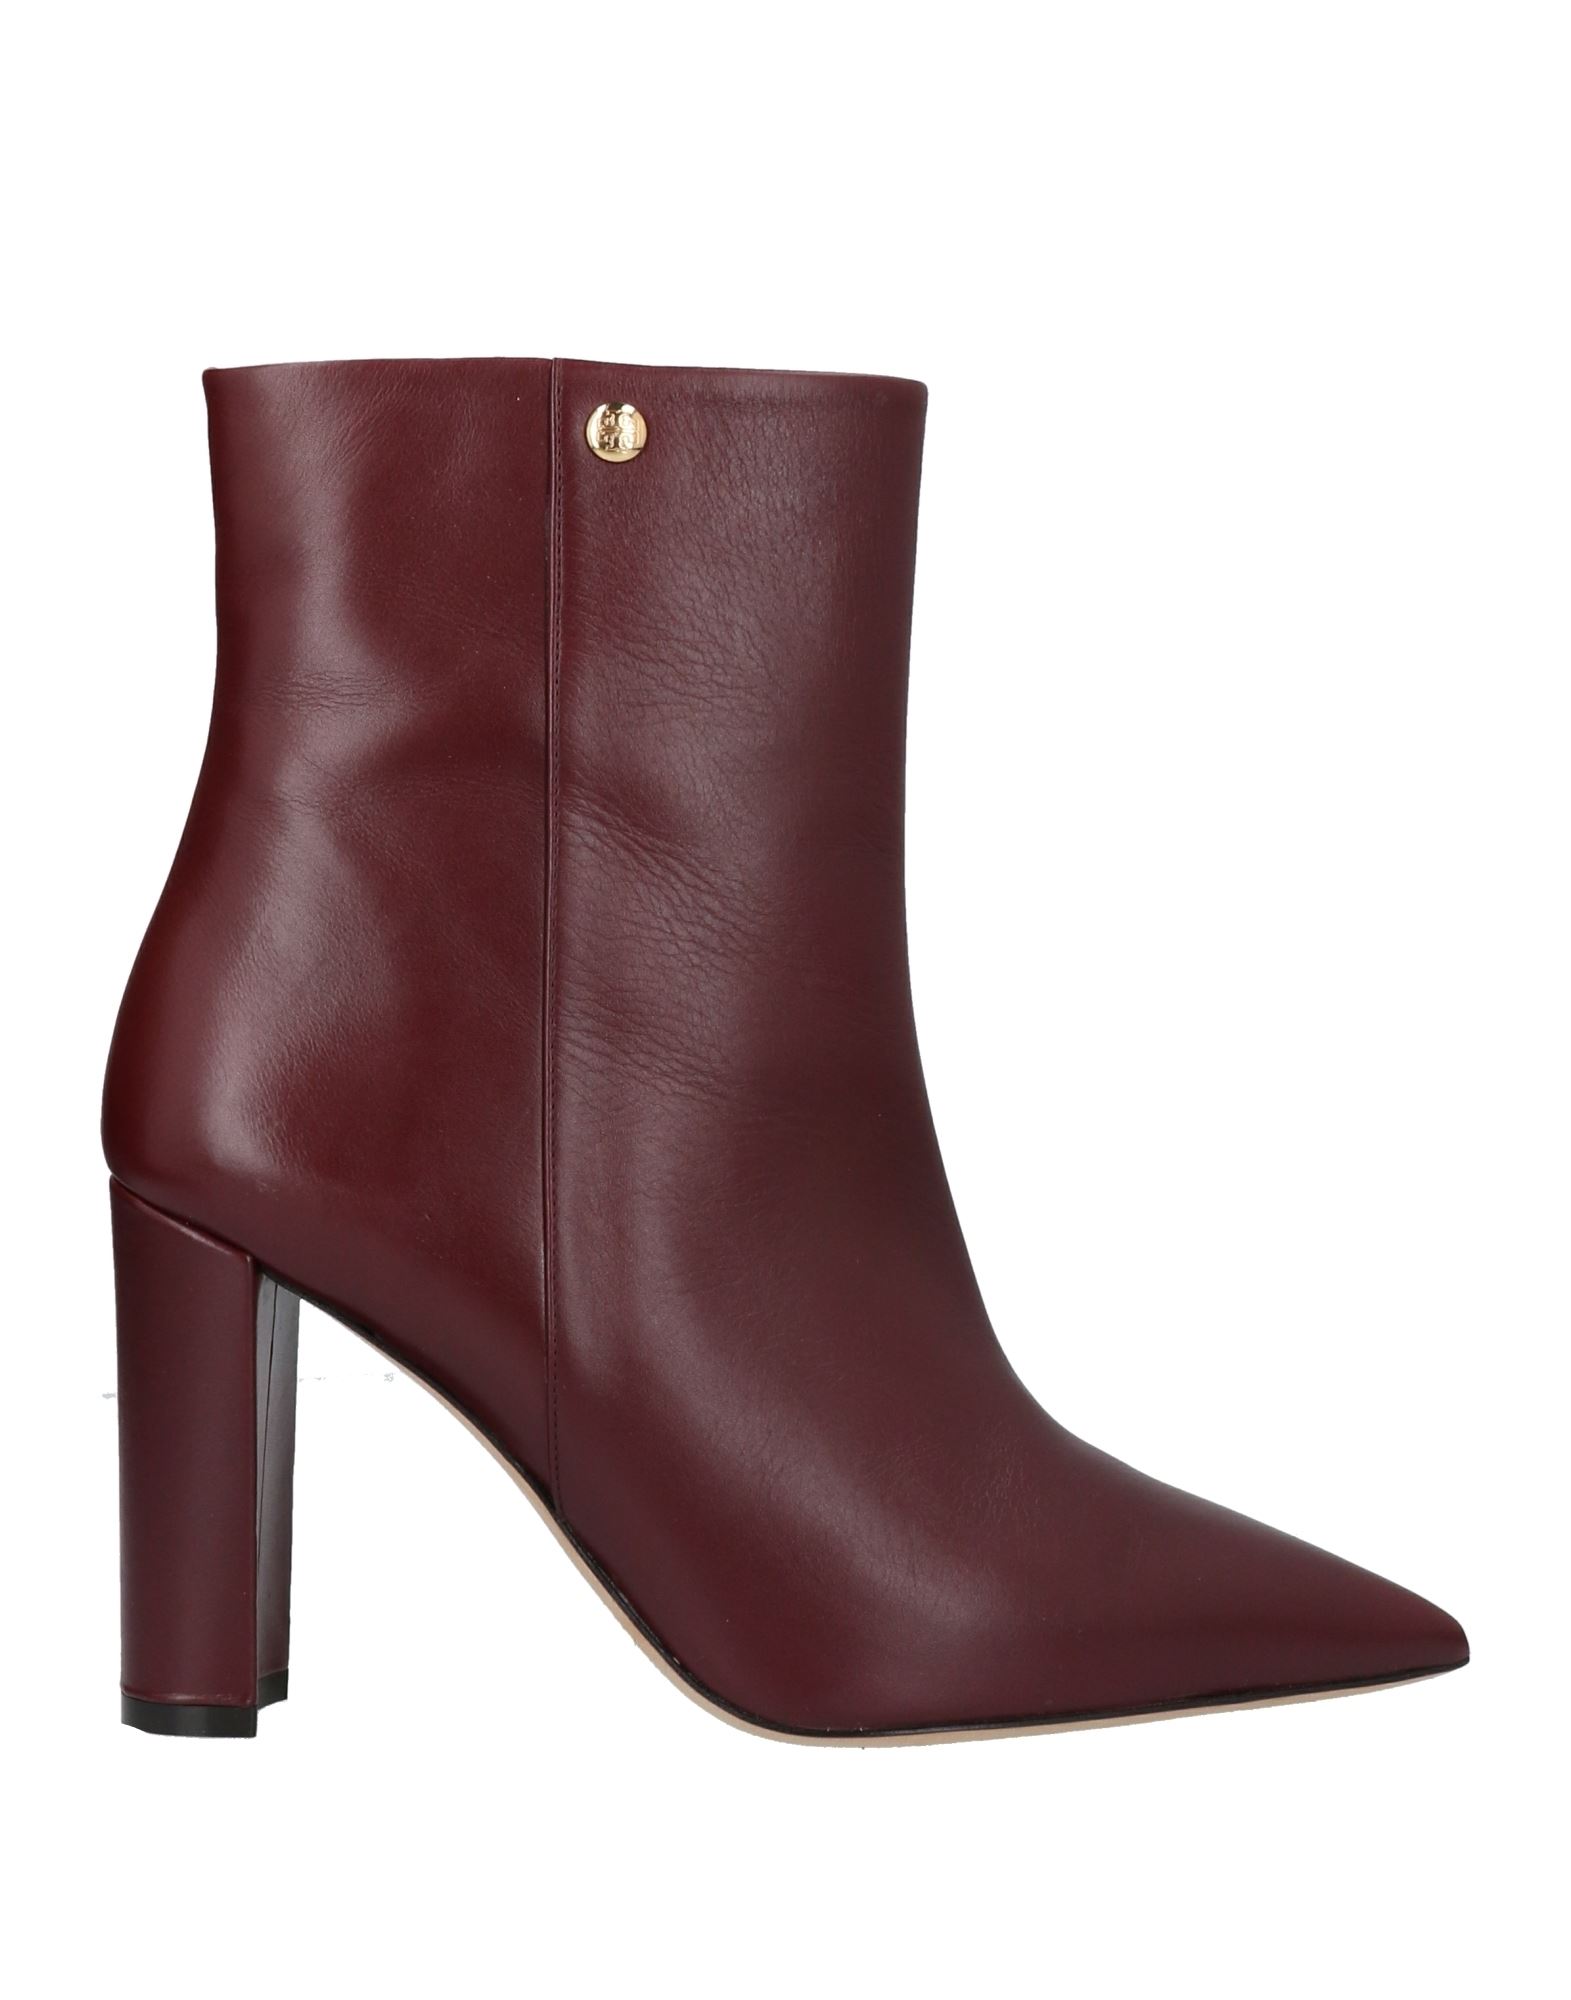 TORY BURCH Ankle boots - Item 11835438